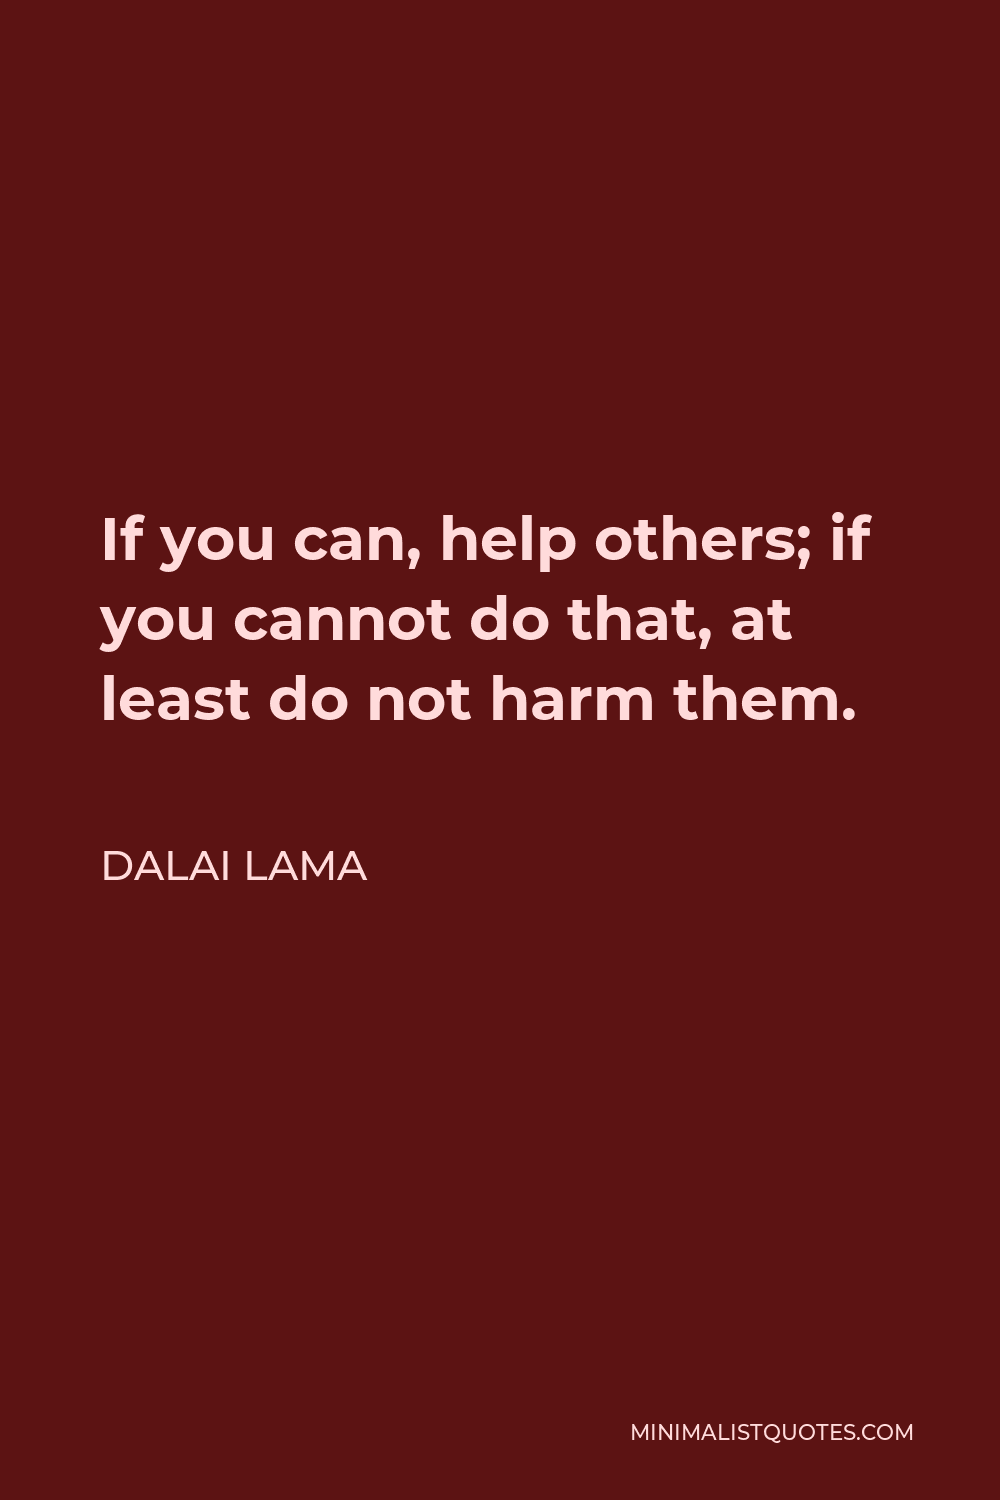 Dalai Lama Quote - If you can, help others; if you cannot do that, at least do not harm them.